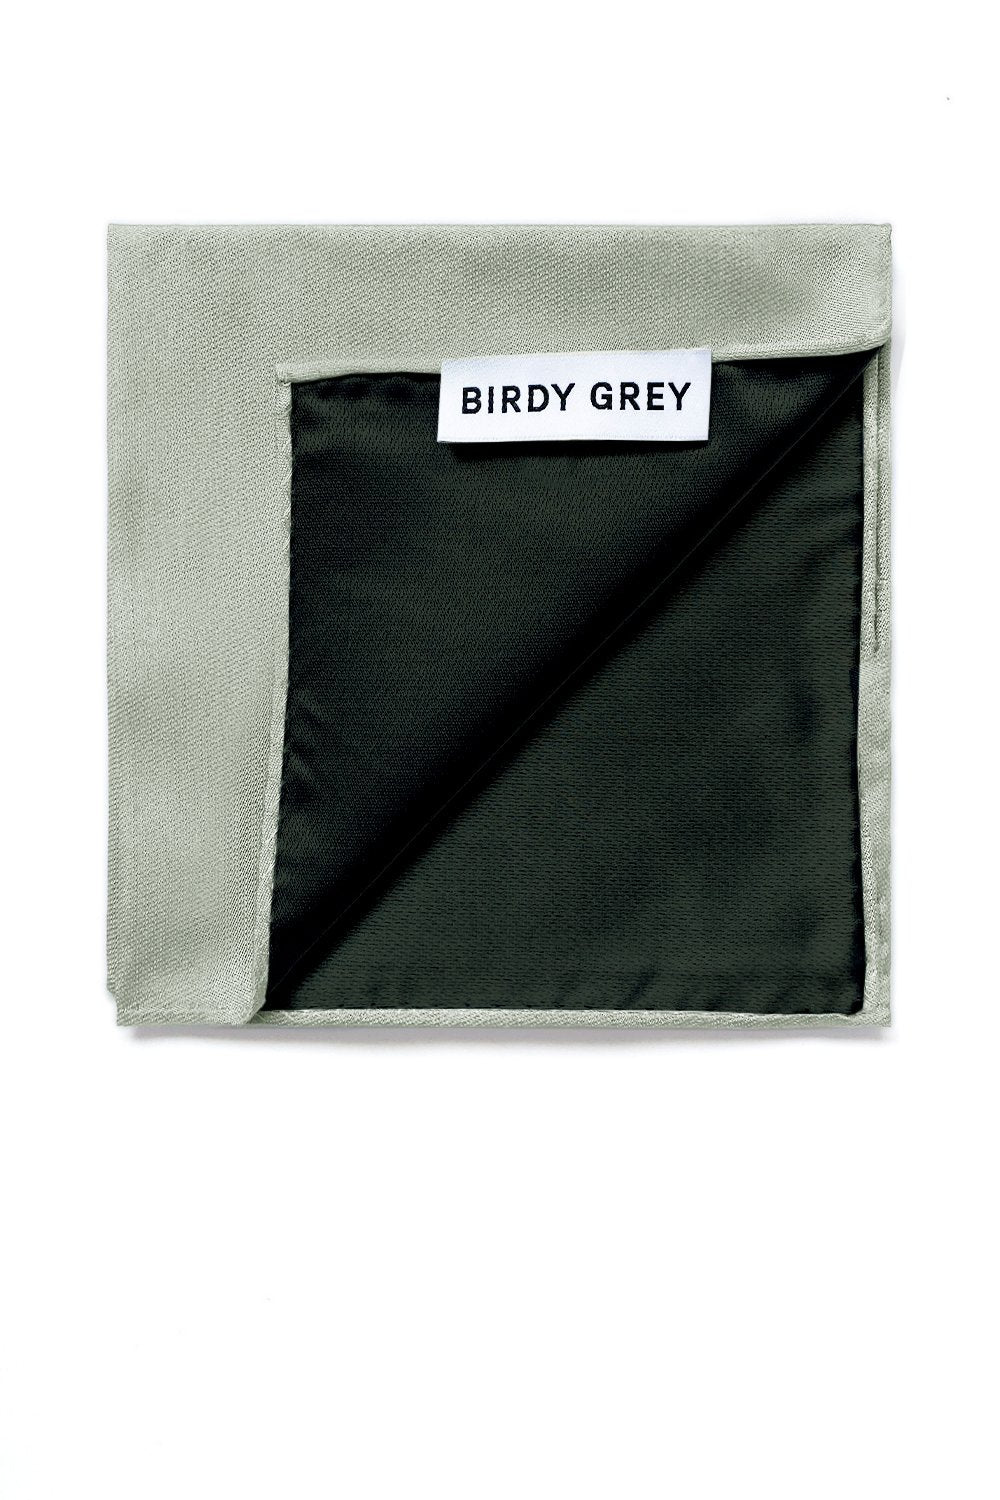 Didi Pocket Square in sage green by Birdy Grey, interior view